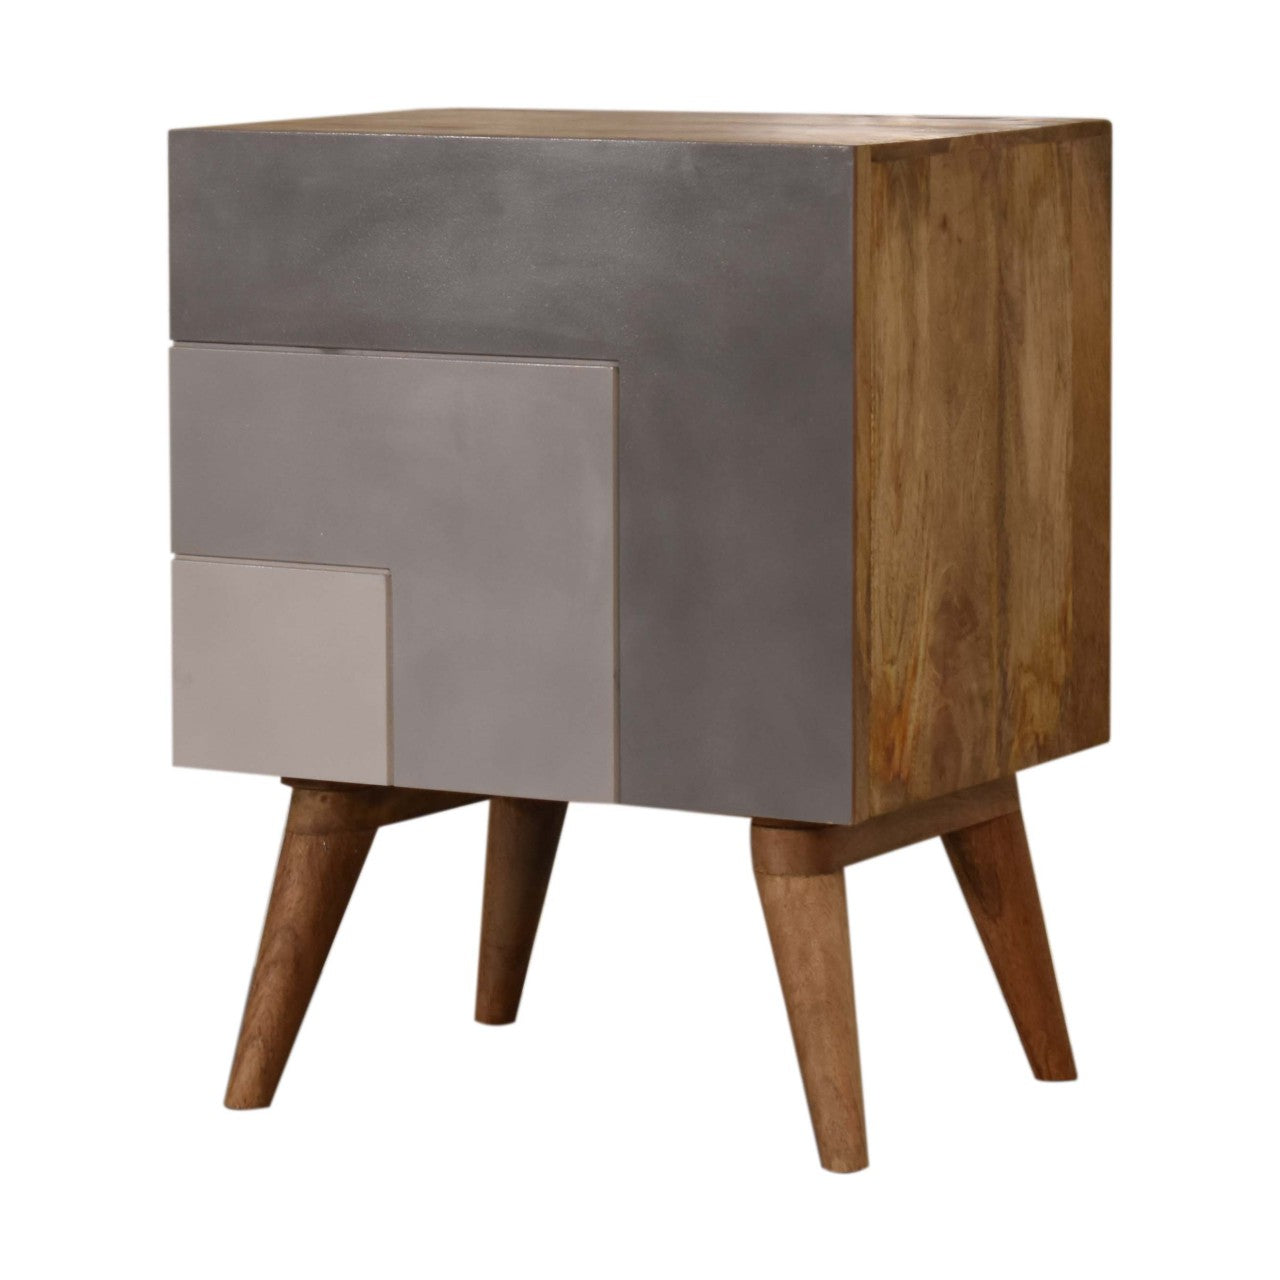 Montcalm Bedside Table, Mango Wood & 3 Shades Grey Painted - Broxle